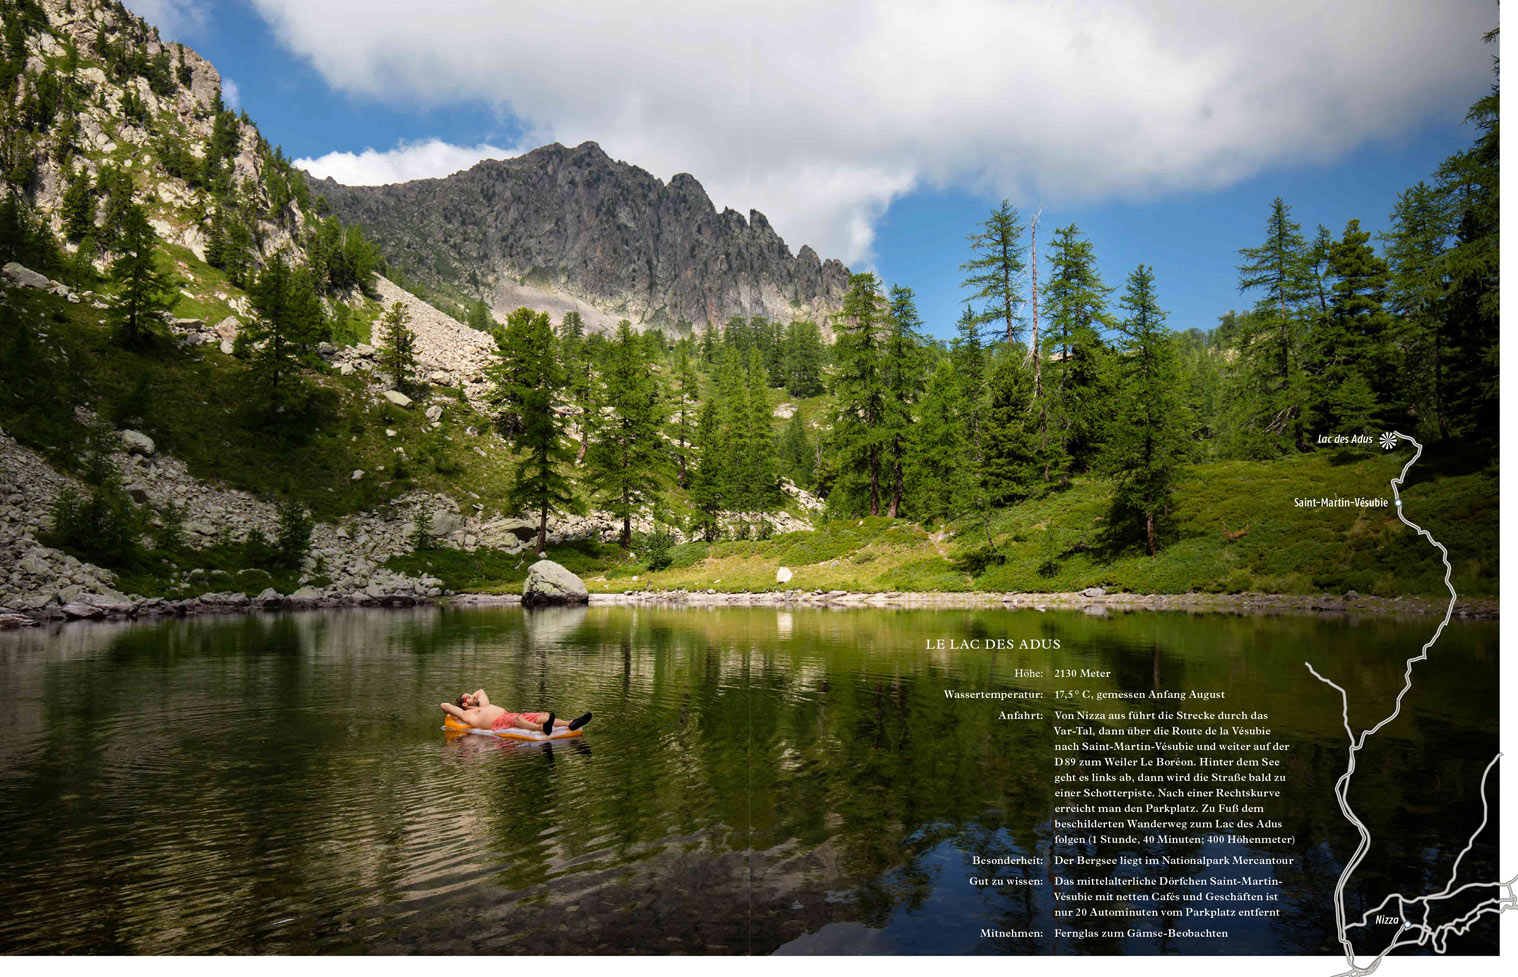 Double page magazine spread showing a full bleed photograph of a man on a lilo in the middle of a mountain lake